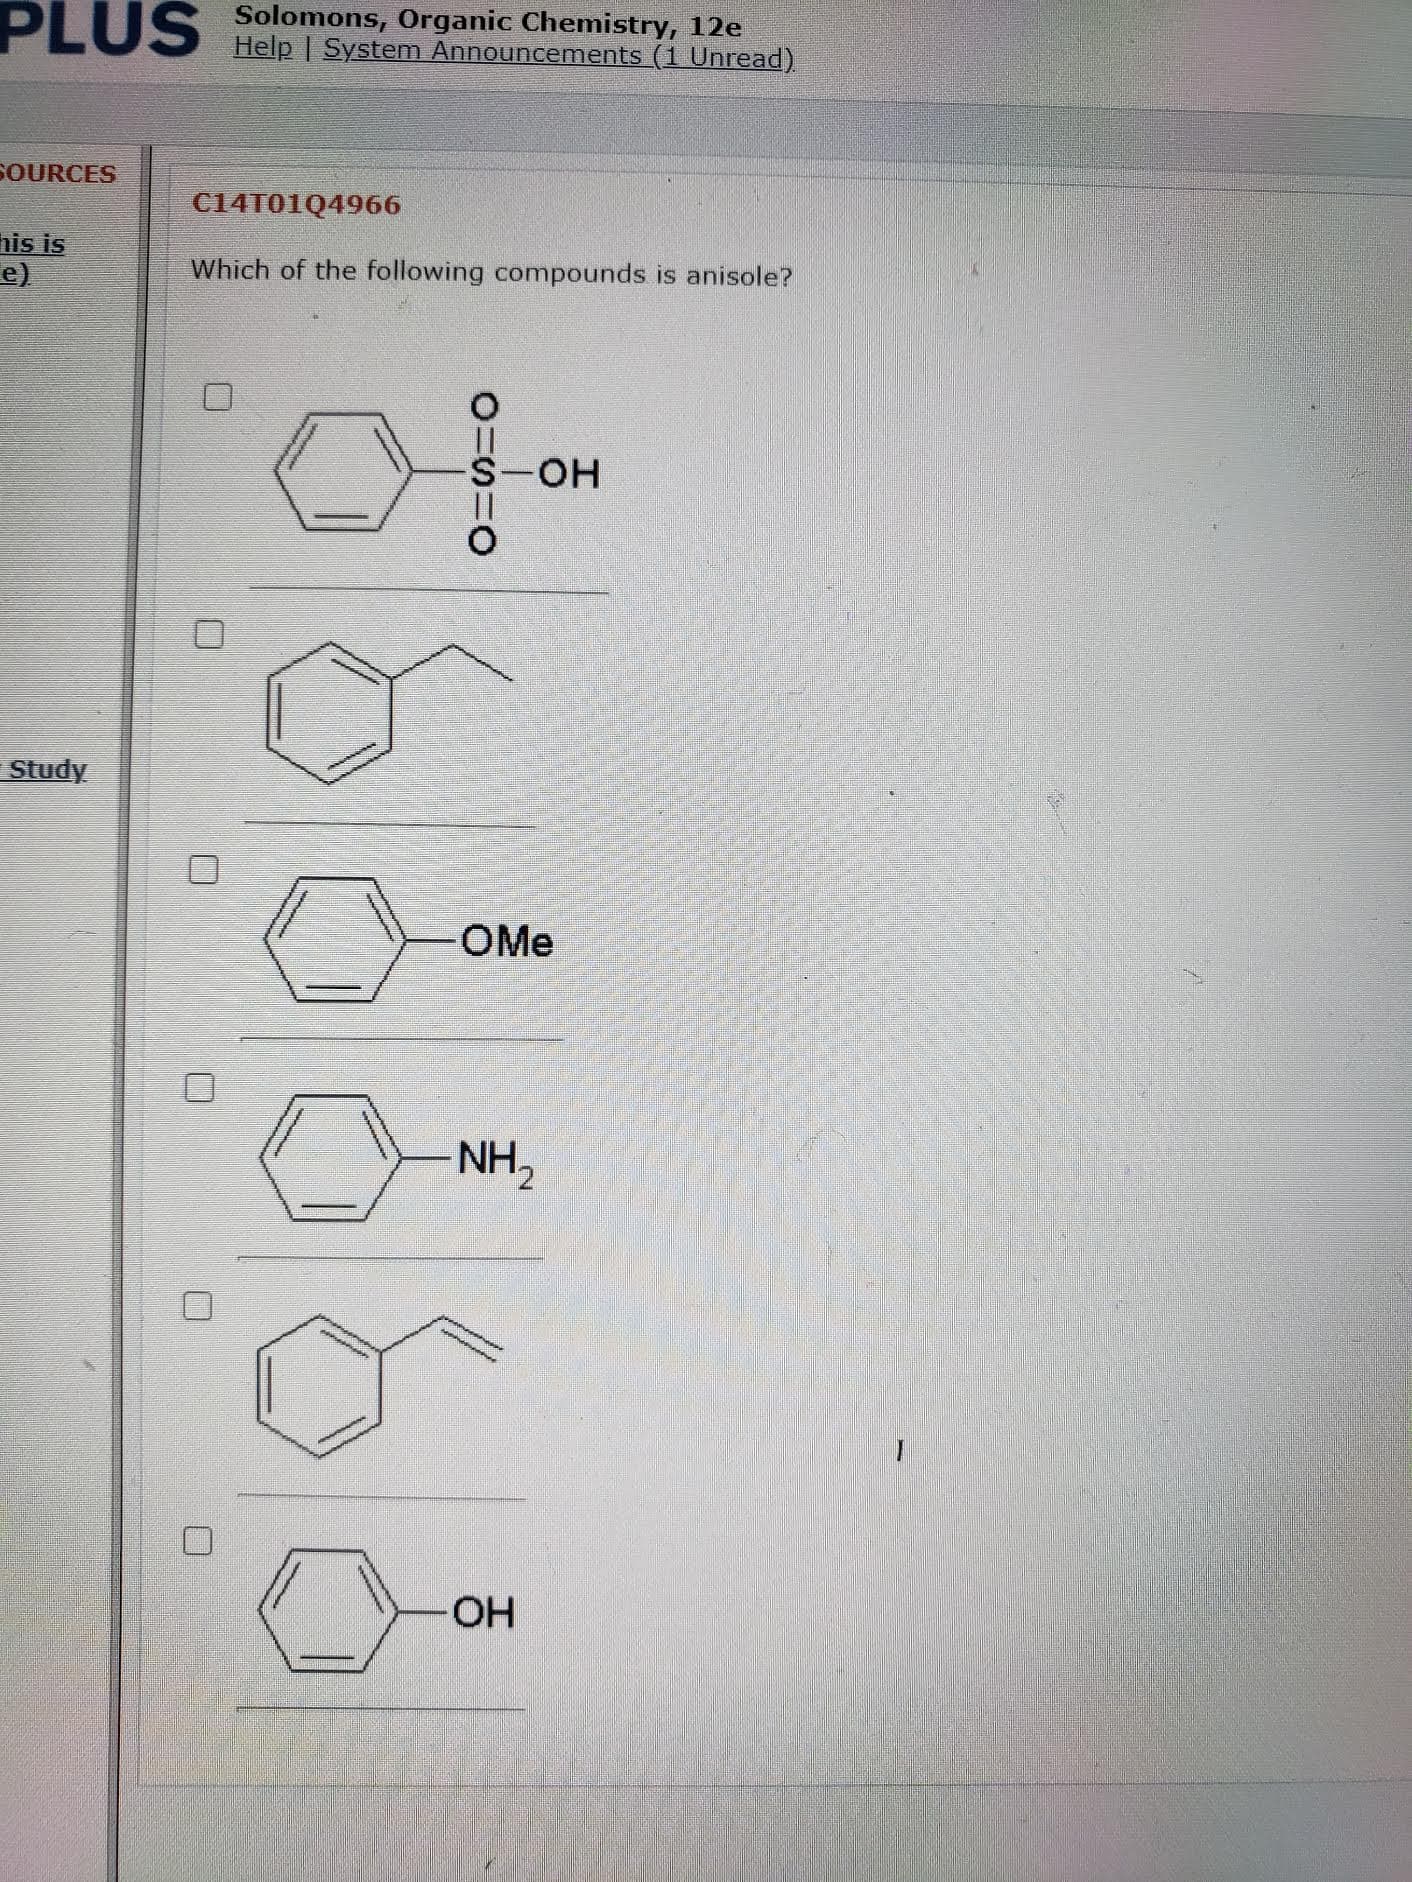 Which of the following compounds is anisole?
S-OH
OMe
NH,
